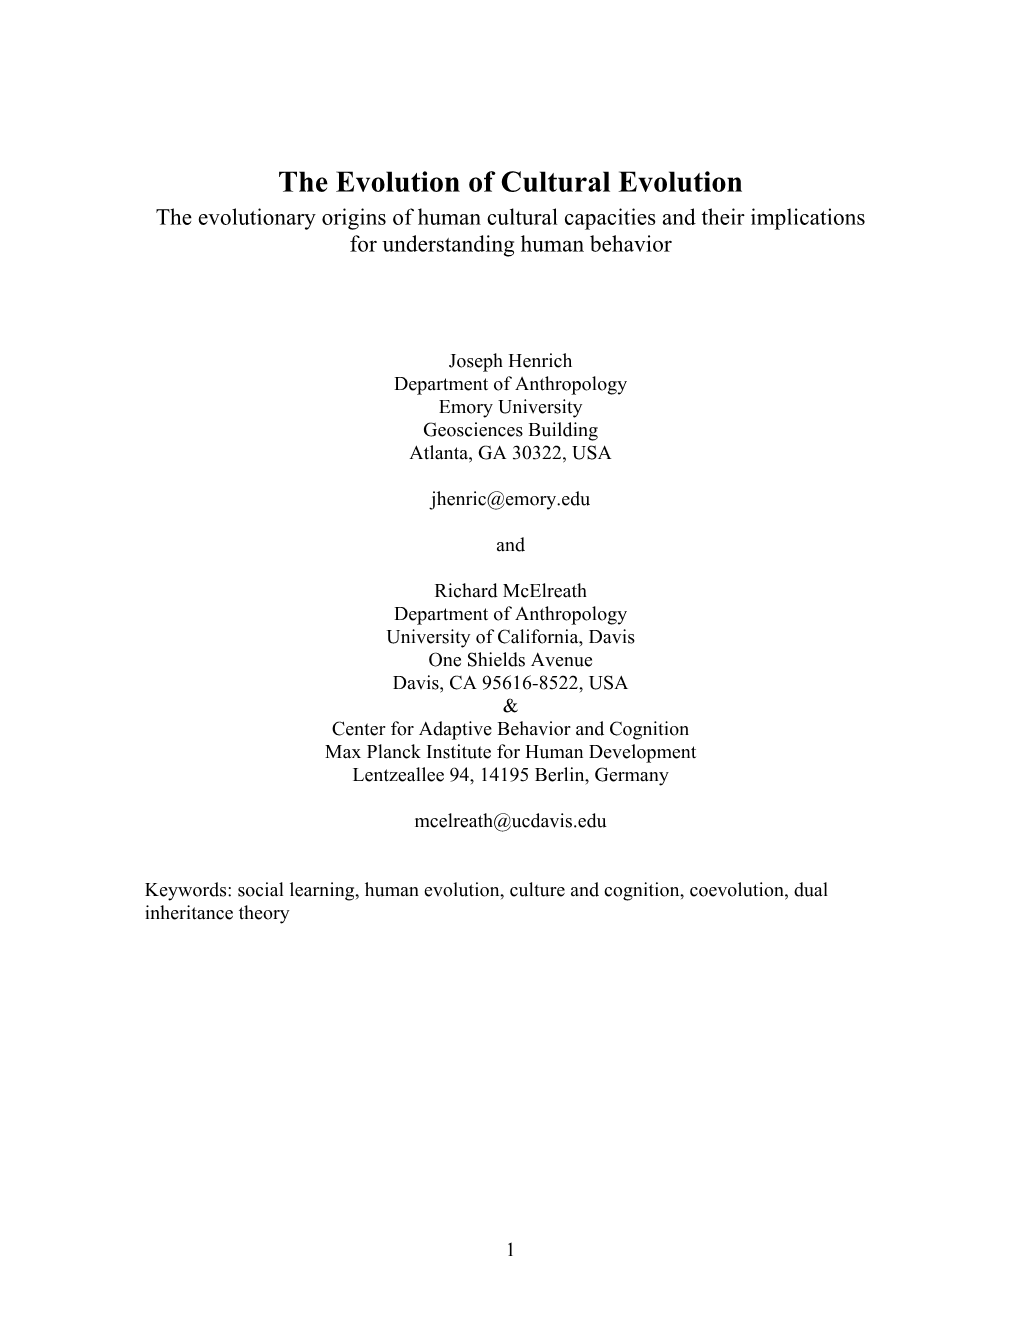 The Evolution of Human Cultural Capacities and Cultural Evolution